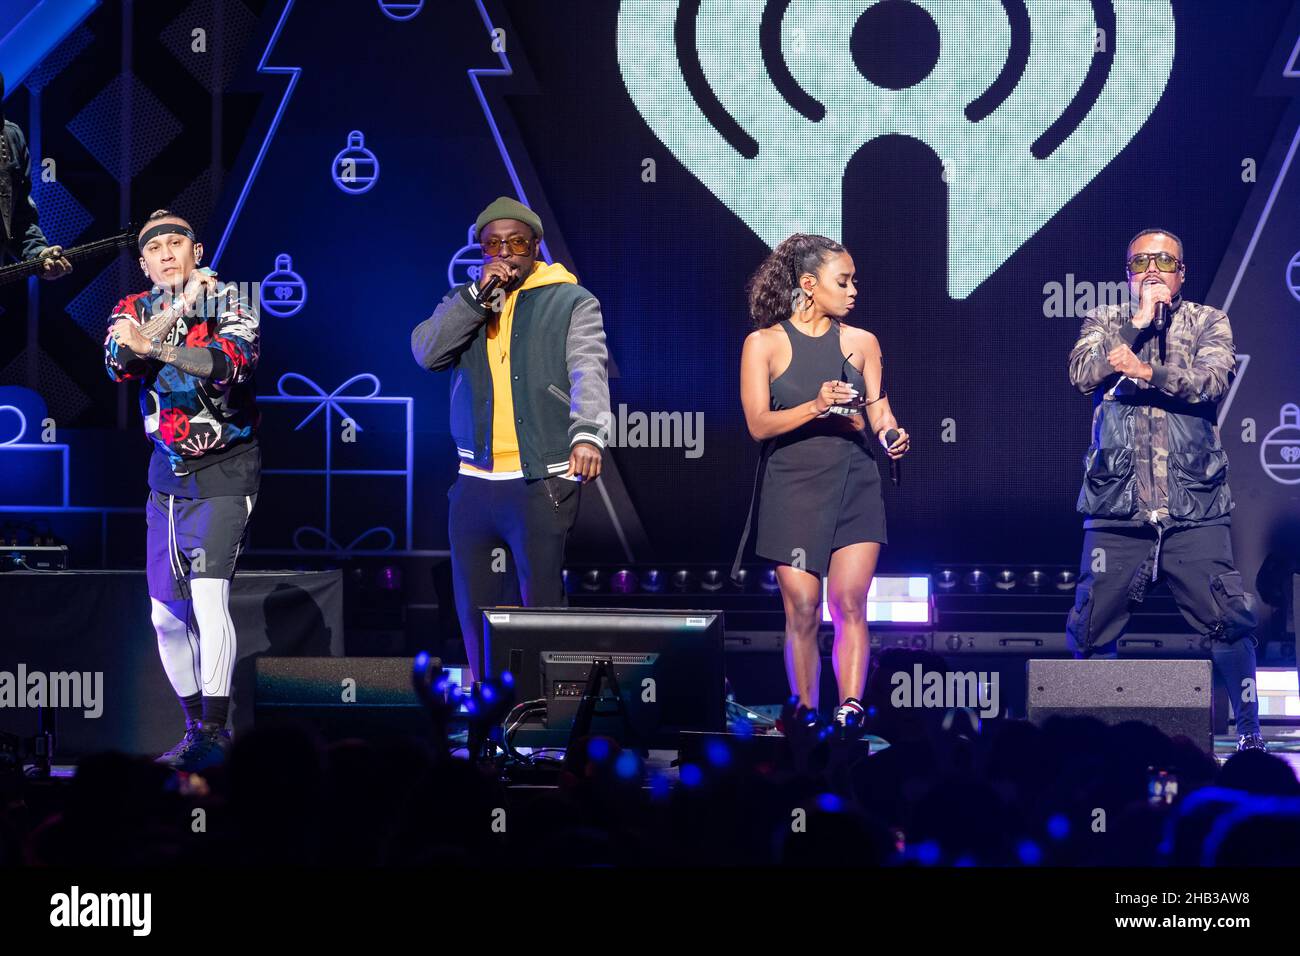 December 14, 2021, Washington, D.C, USA: TABOO, WILL.I.AM,  J. REY SOUL and APL.DE.AP of the Black Eyed Peas perform at the Hot 99.5 Jingle Ball at Capital One Arena in Washington, D.C. (Credit Image: © Kyle Gustafson/ZUMA Press Wire) Stock Photo